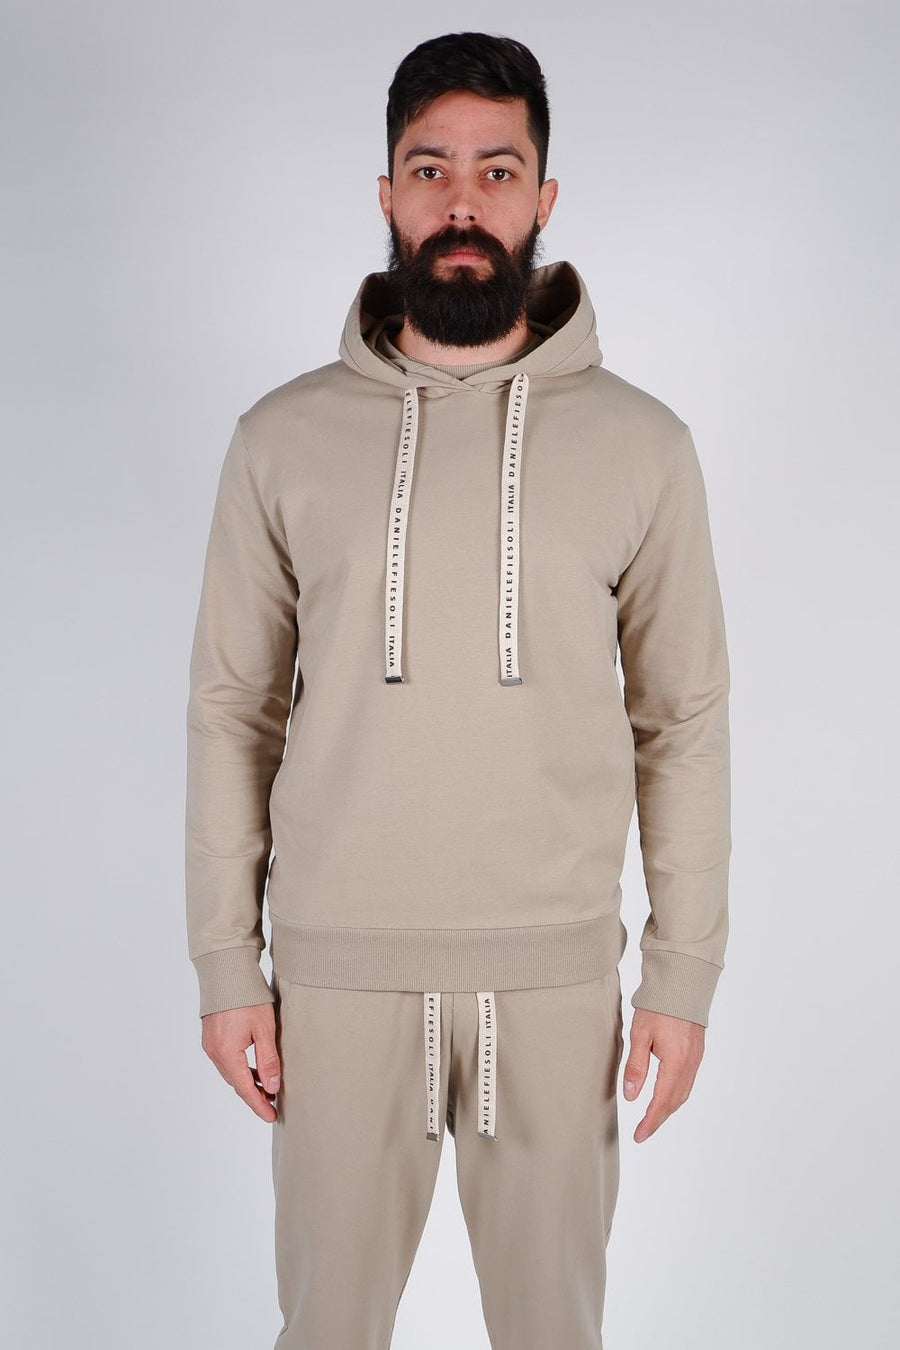 Buy the Daniele Fiesoli Jersey Hoodie in Taupe at Intro. Spend £50 for free UK delivery. Official stockists. We ship worldwide.